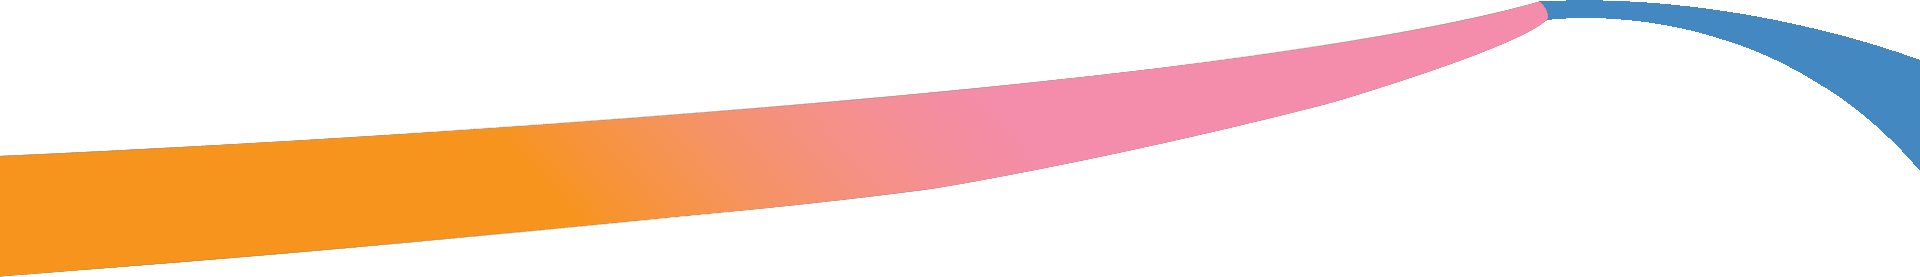 A pink and green background with an arrow.